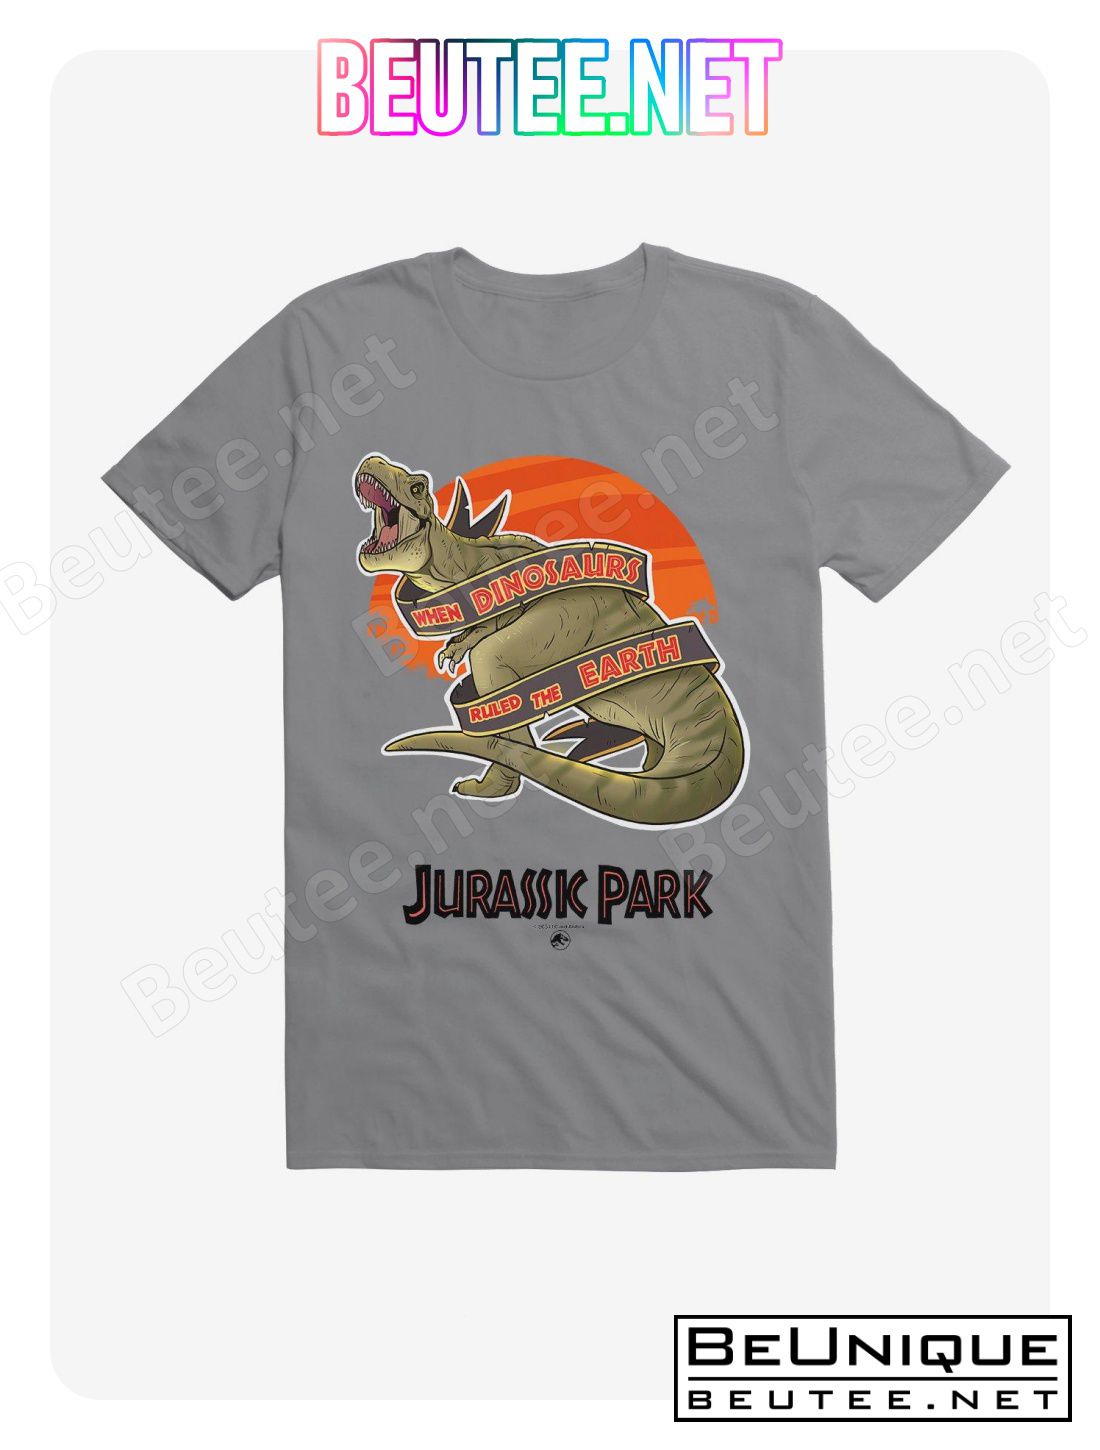 Jurassic Park When Dinos Rules The Earth Black T-Shirt